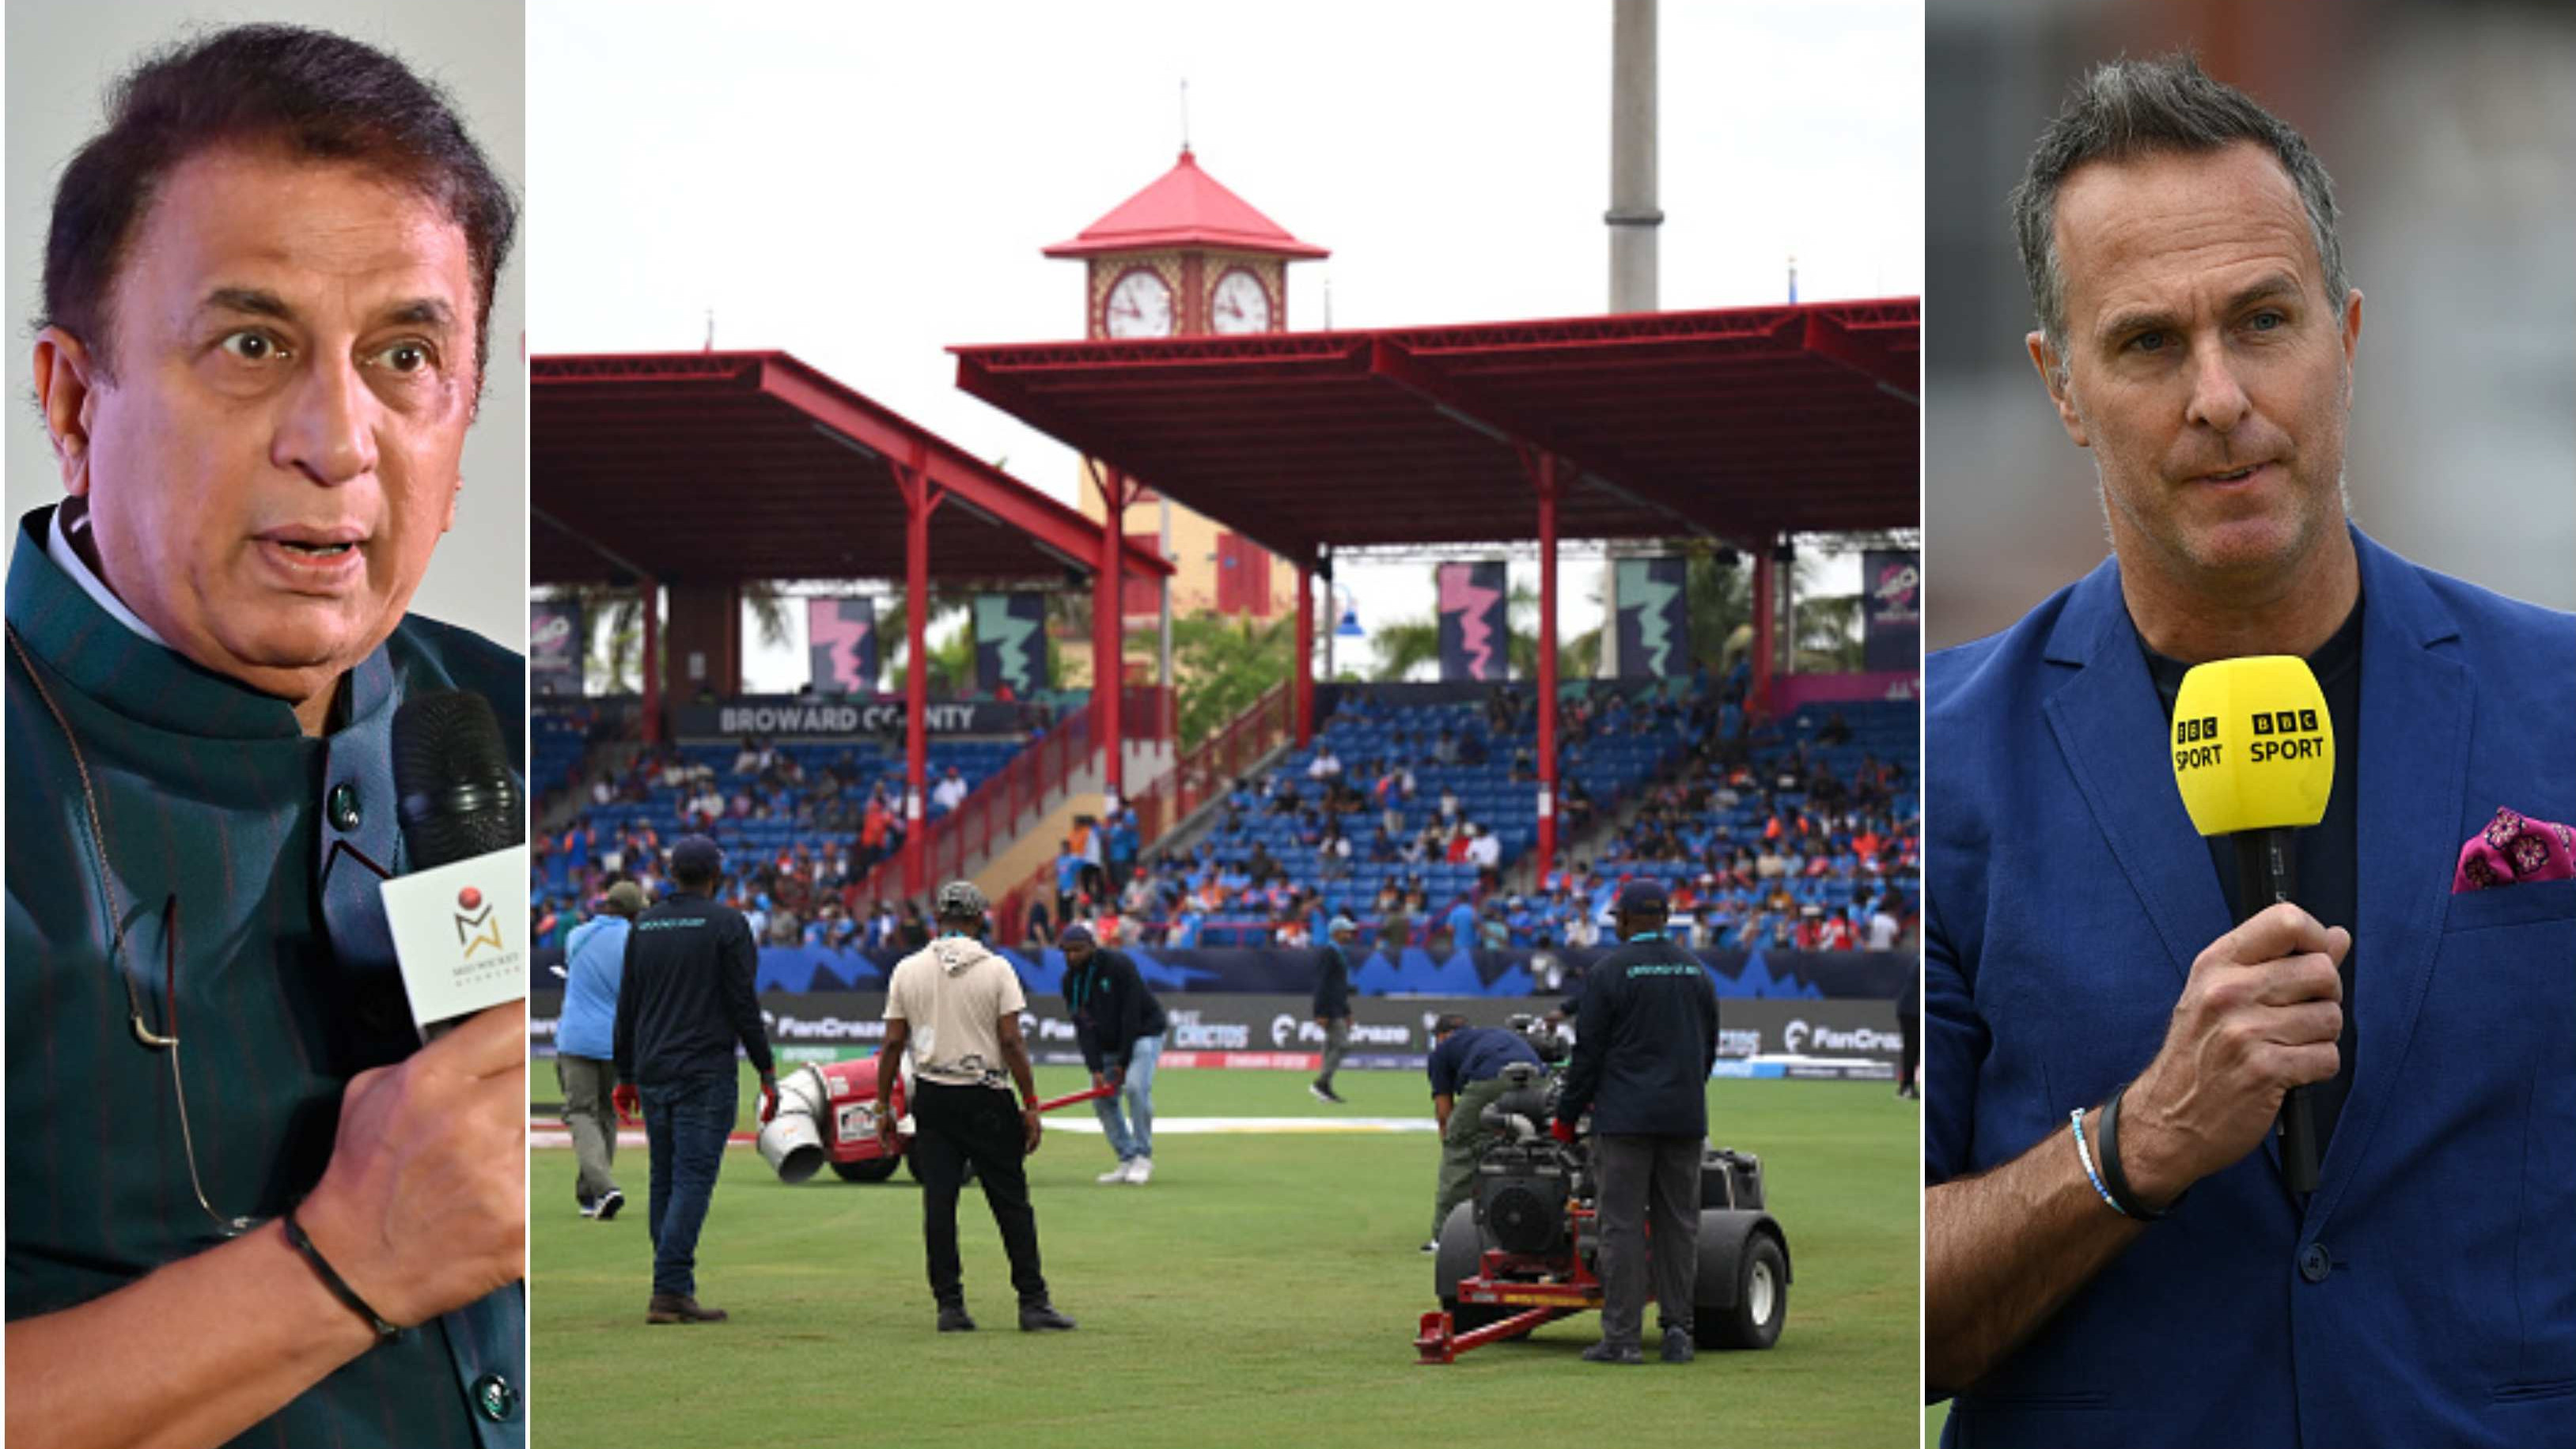 “All the money in the game yet…,” Vaughan, Gavaskar slam ICC after back-to-back abandoned games in Florida